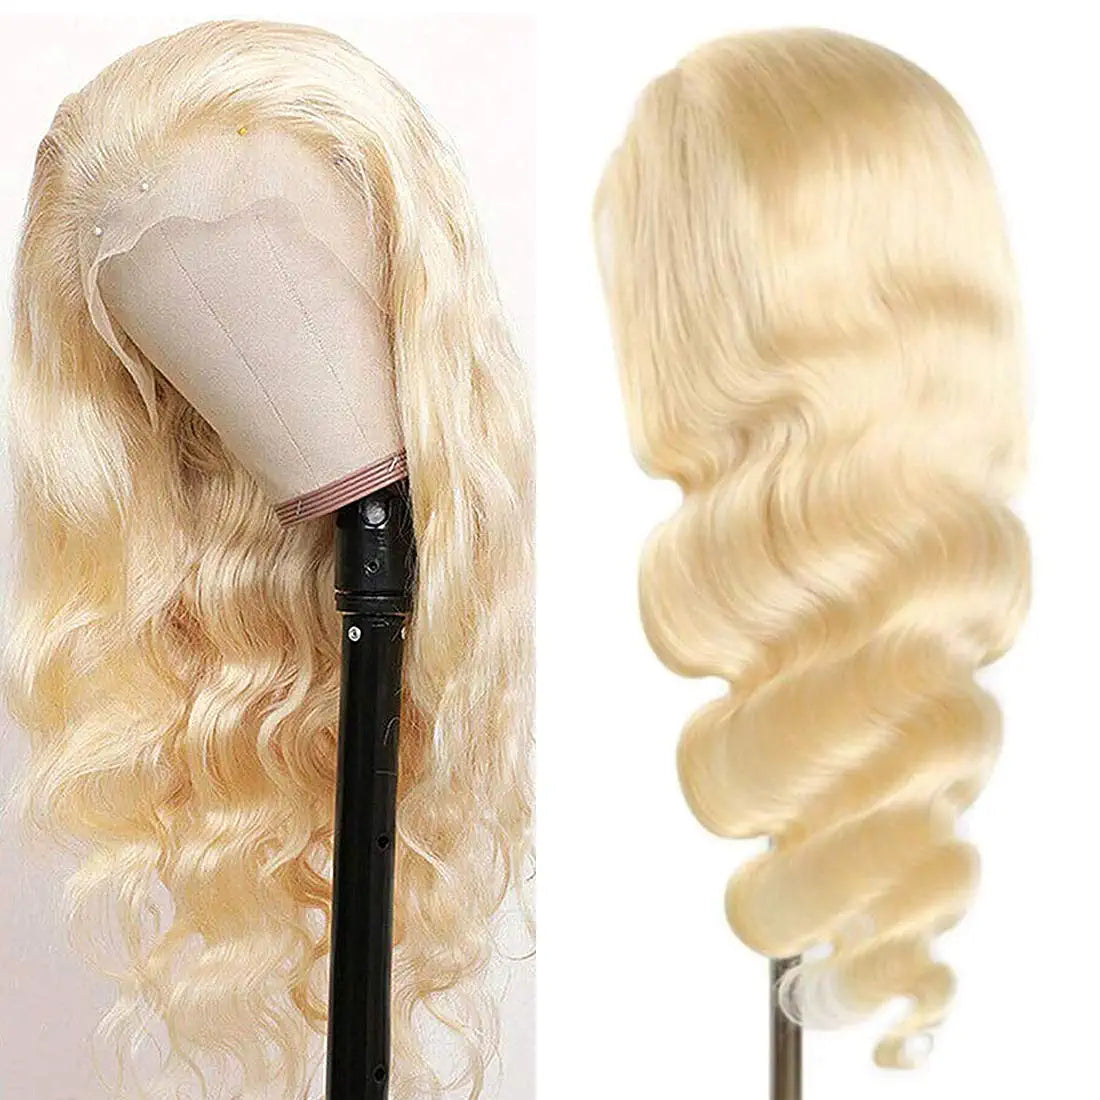 BLONDE BODY WAVE HUMAN HAIR LACE FRONT WIG 22'' - VIP Extensions